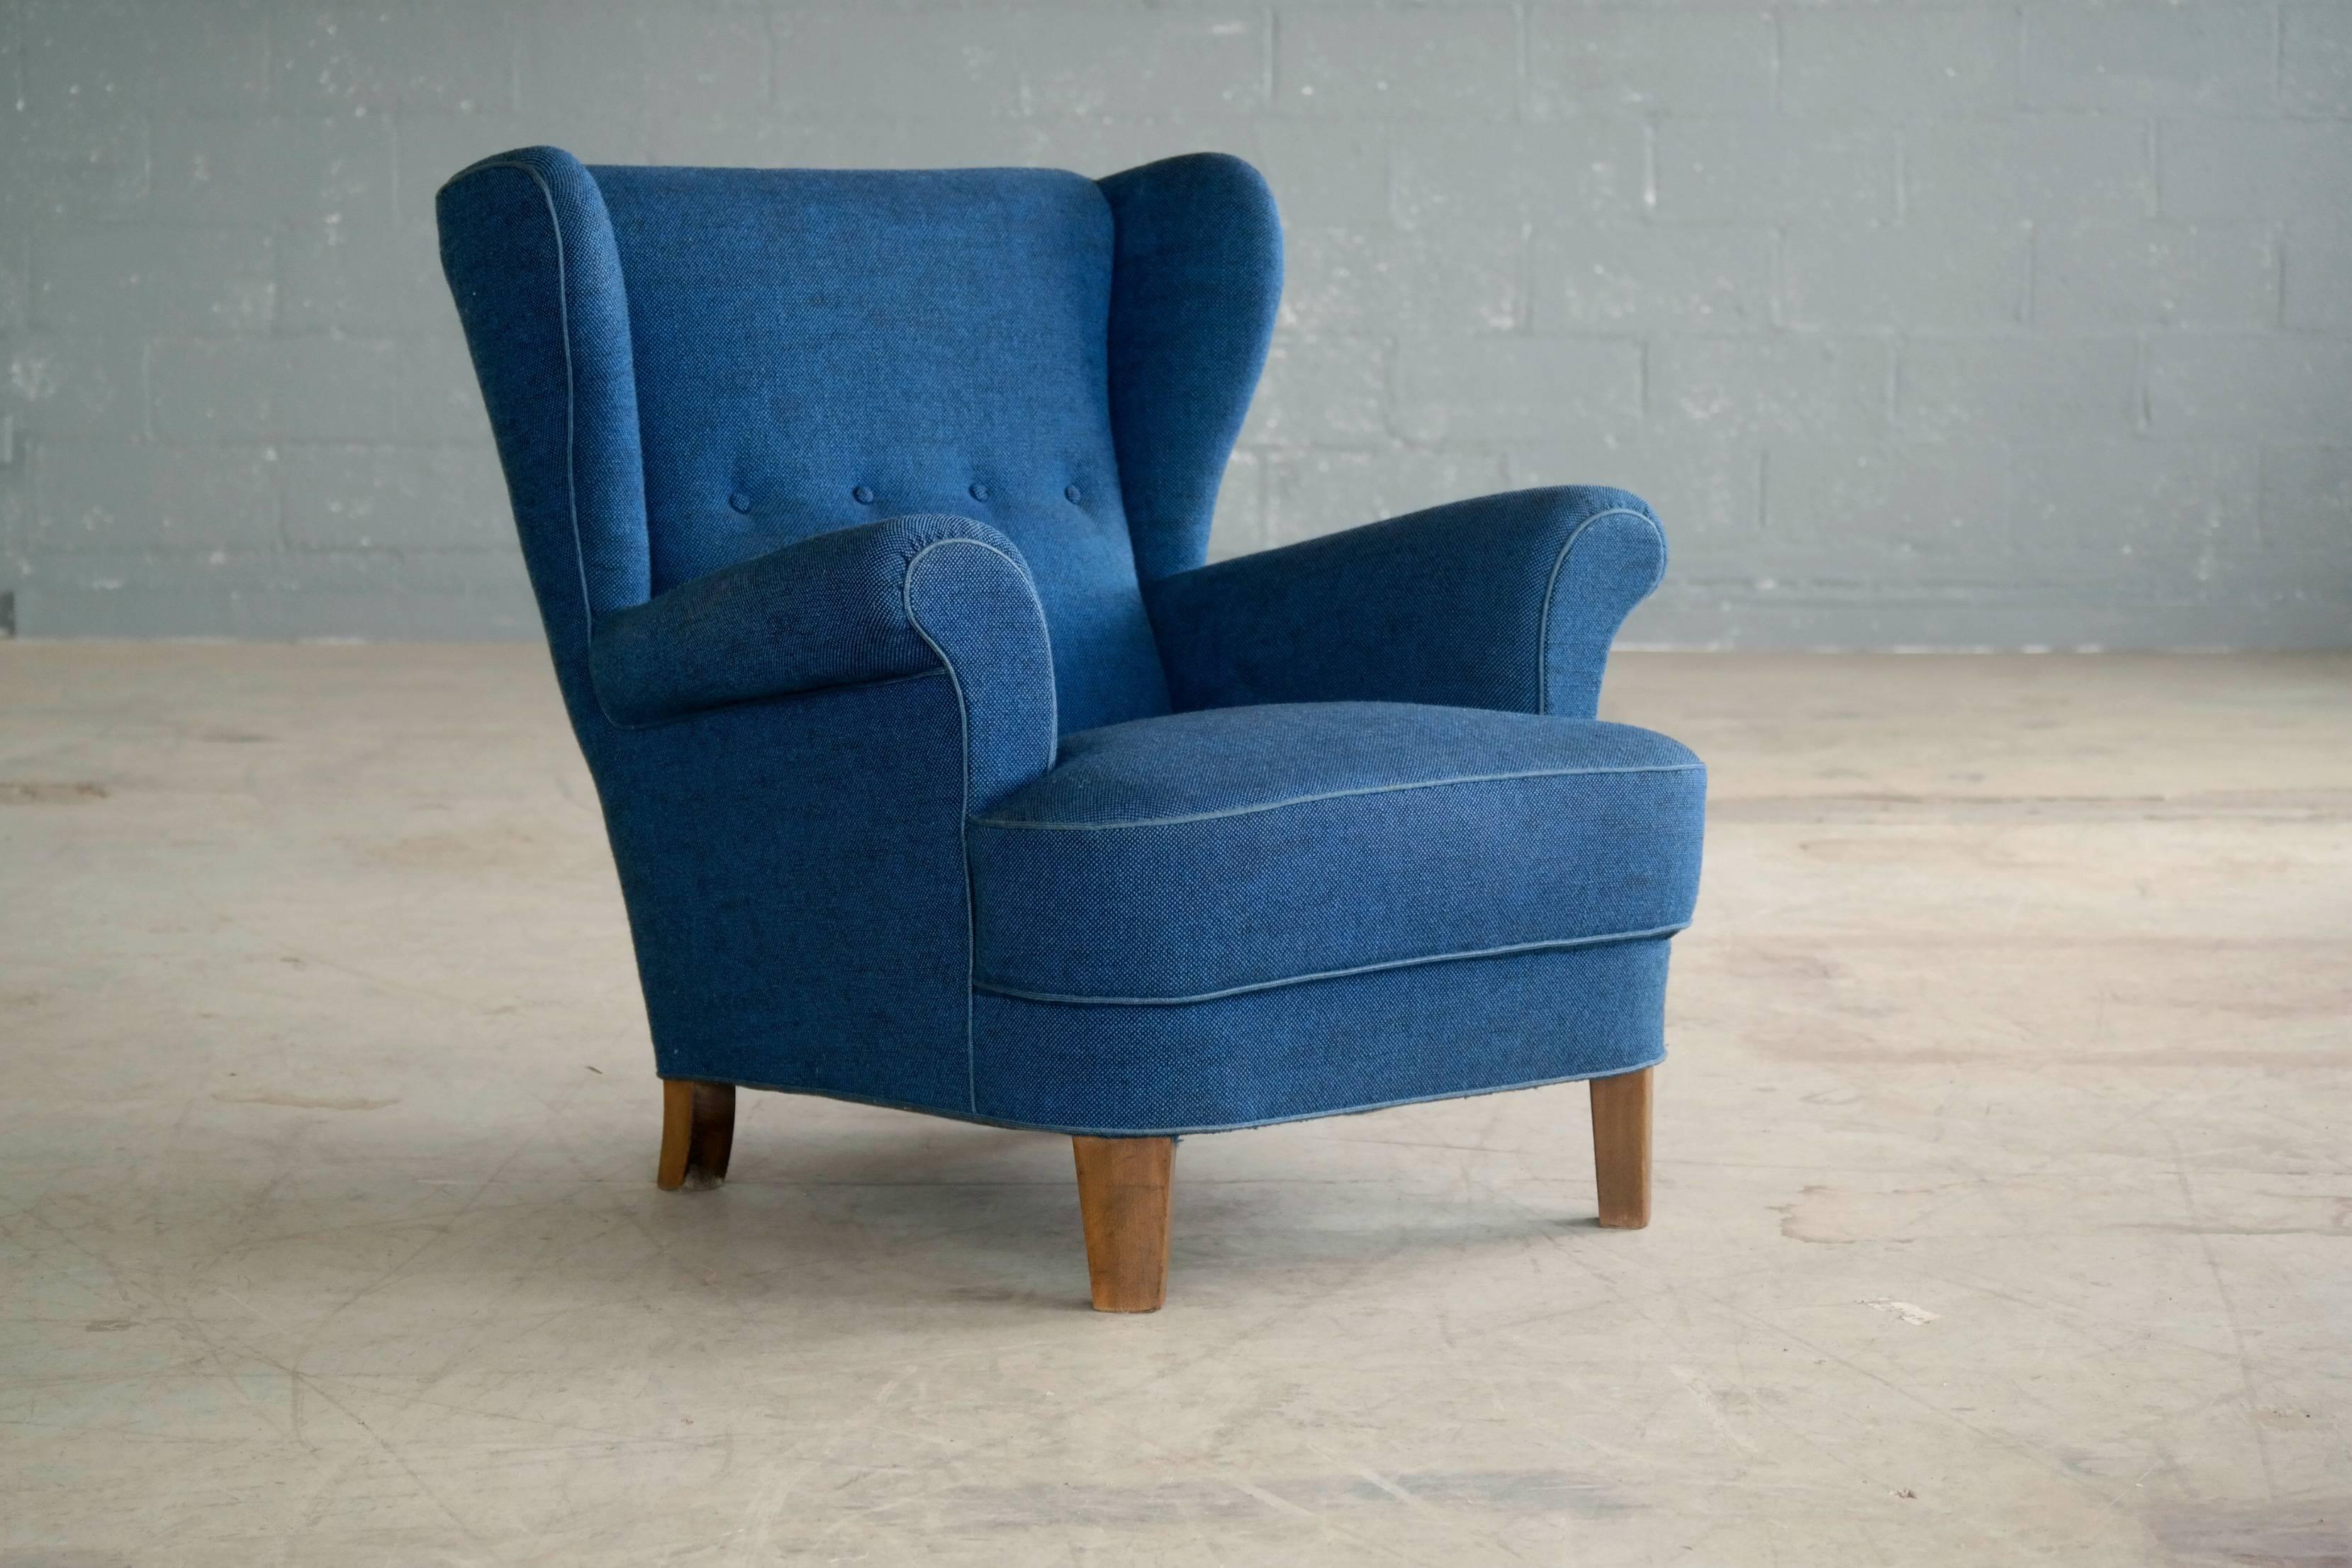 Beautifully proportioned 1950s armchair with a beechwood frame on Mahogany legs. Later re-upholstered in a vibrant blue Hallingdal wool fabric by Kvadrat. Impressive with great presence and superbly comfortable. Excellent overall condition.